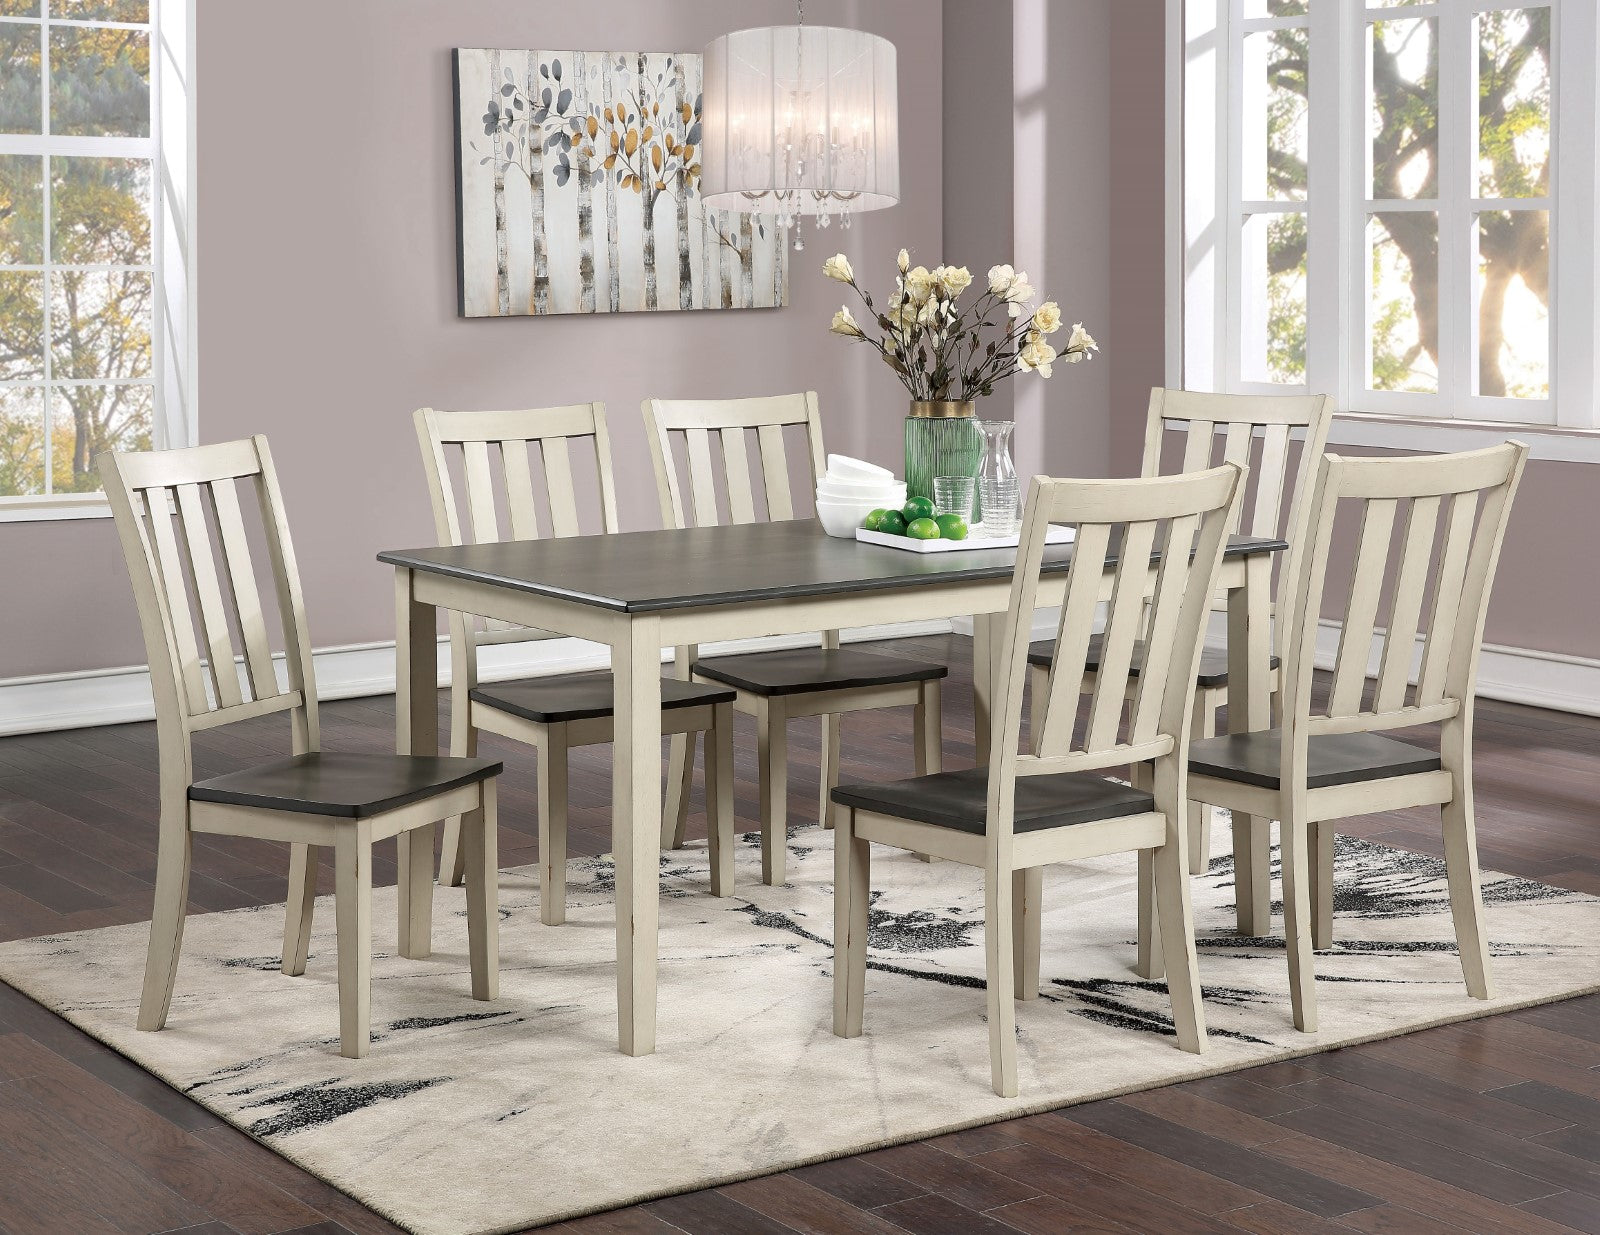 ZNTS Dining Room Furniture 1pc Dining Table Only Dual Tone Design Antique White / Gray Solid wood Table B011108522